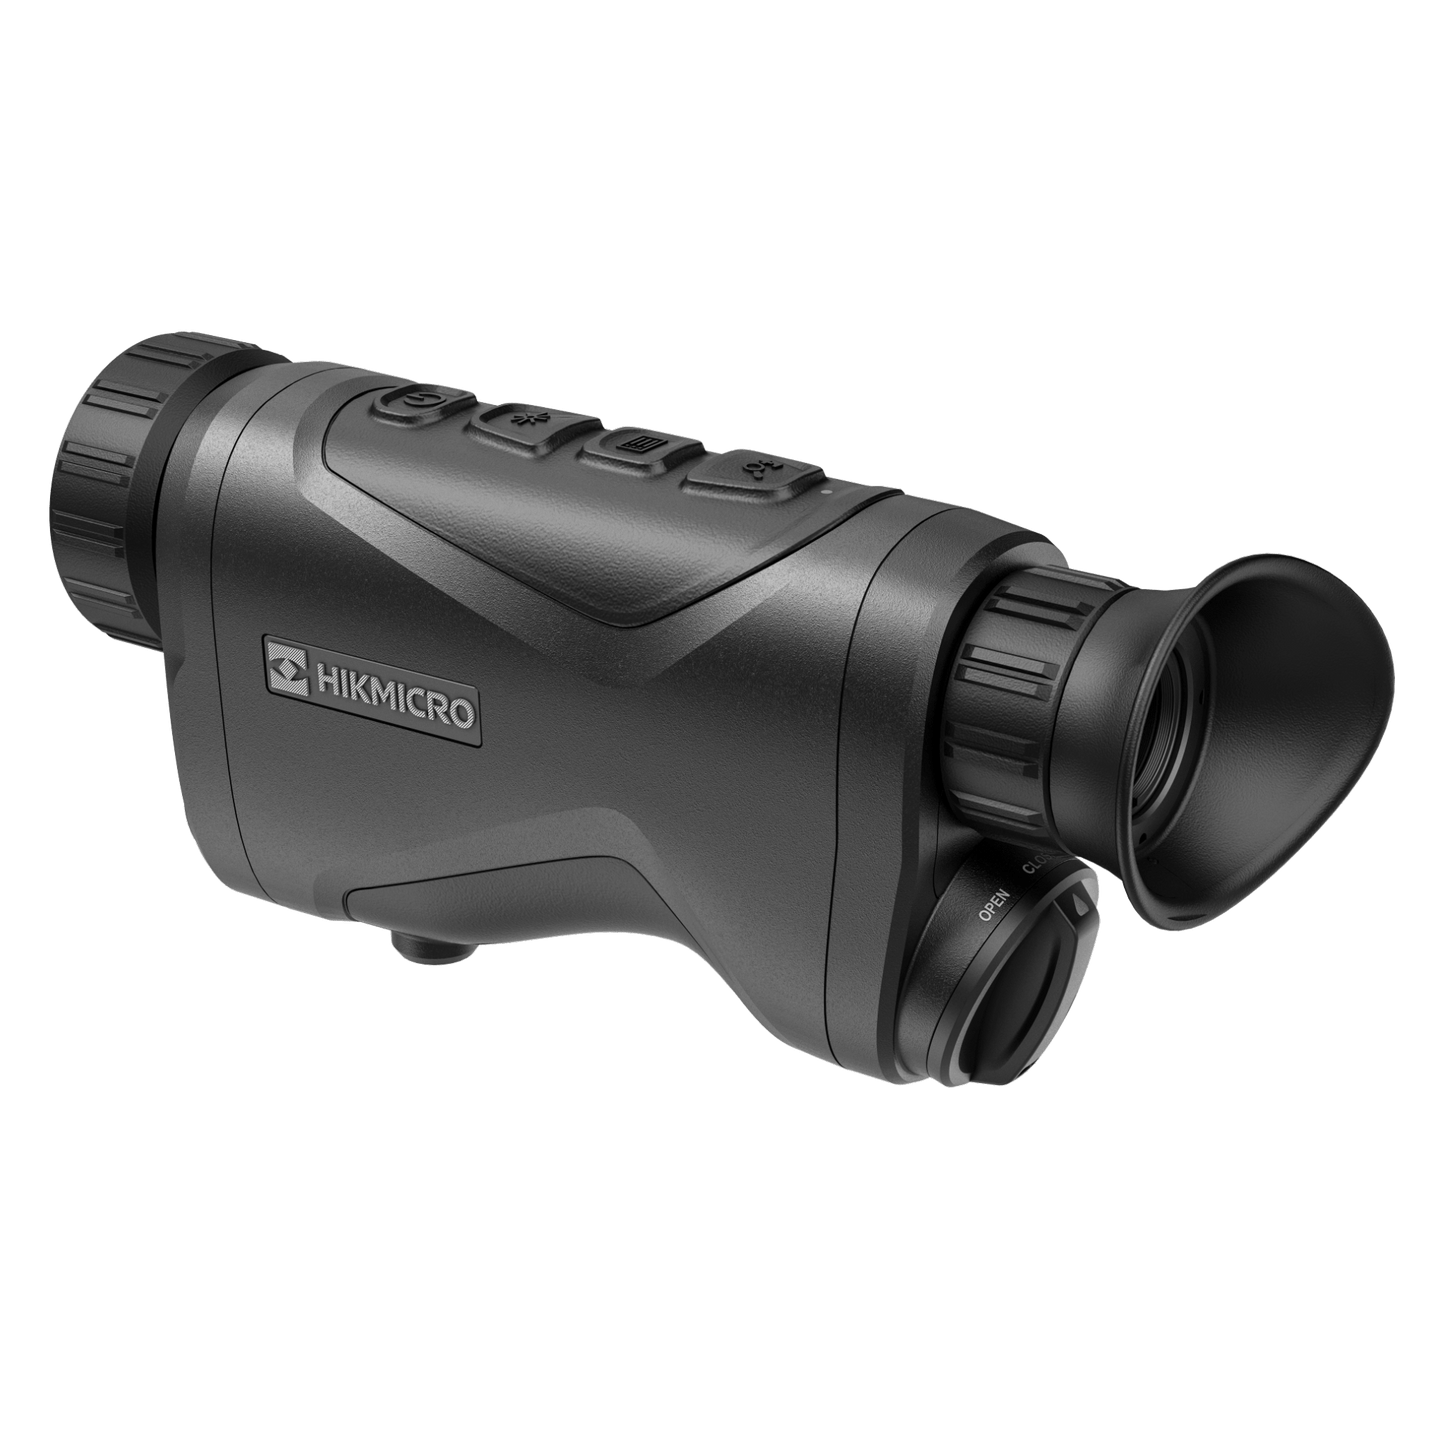 Rear and top view of the HikMicro GH35L Thermal Monocular, emphasizing the eyepiece, battery port, and strategically positioned control buttons. The branded logo is prominently displayed on the textured body, underscoring its application in outdoor, hunting, and security operations.